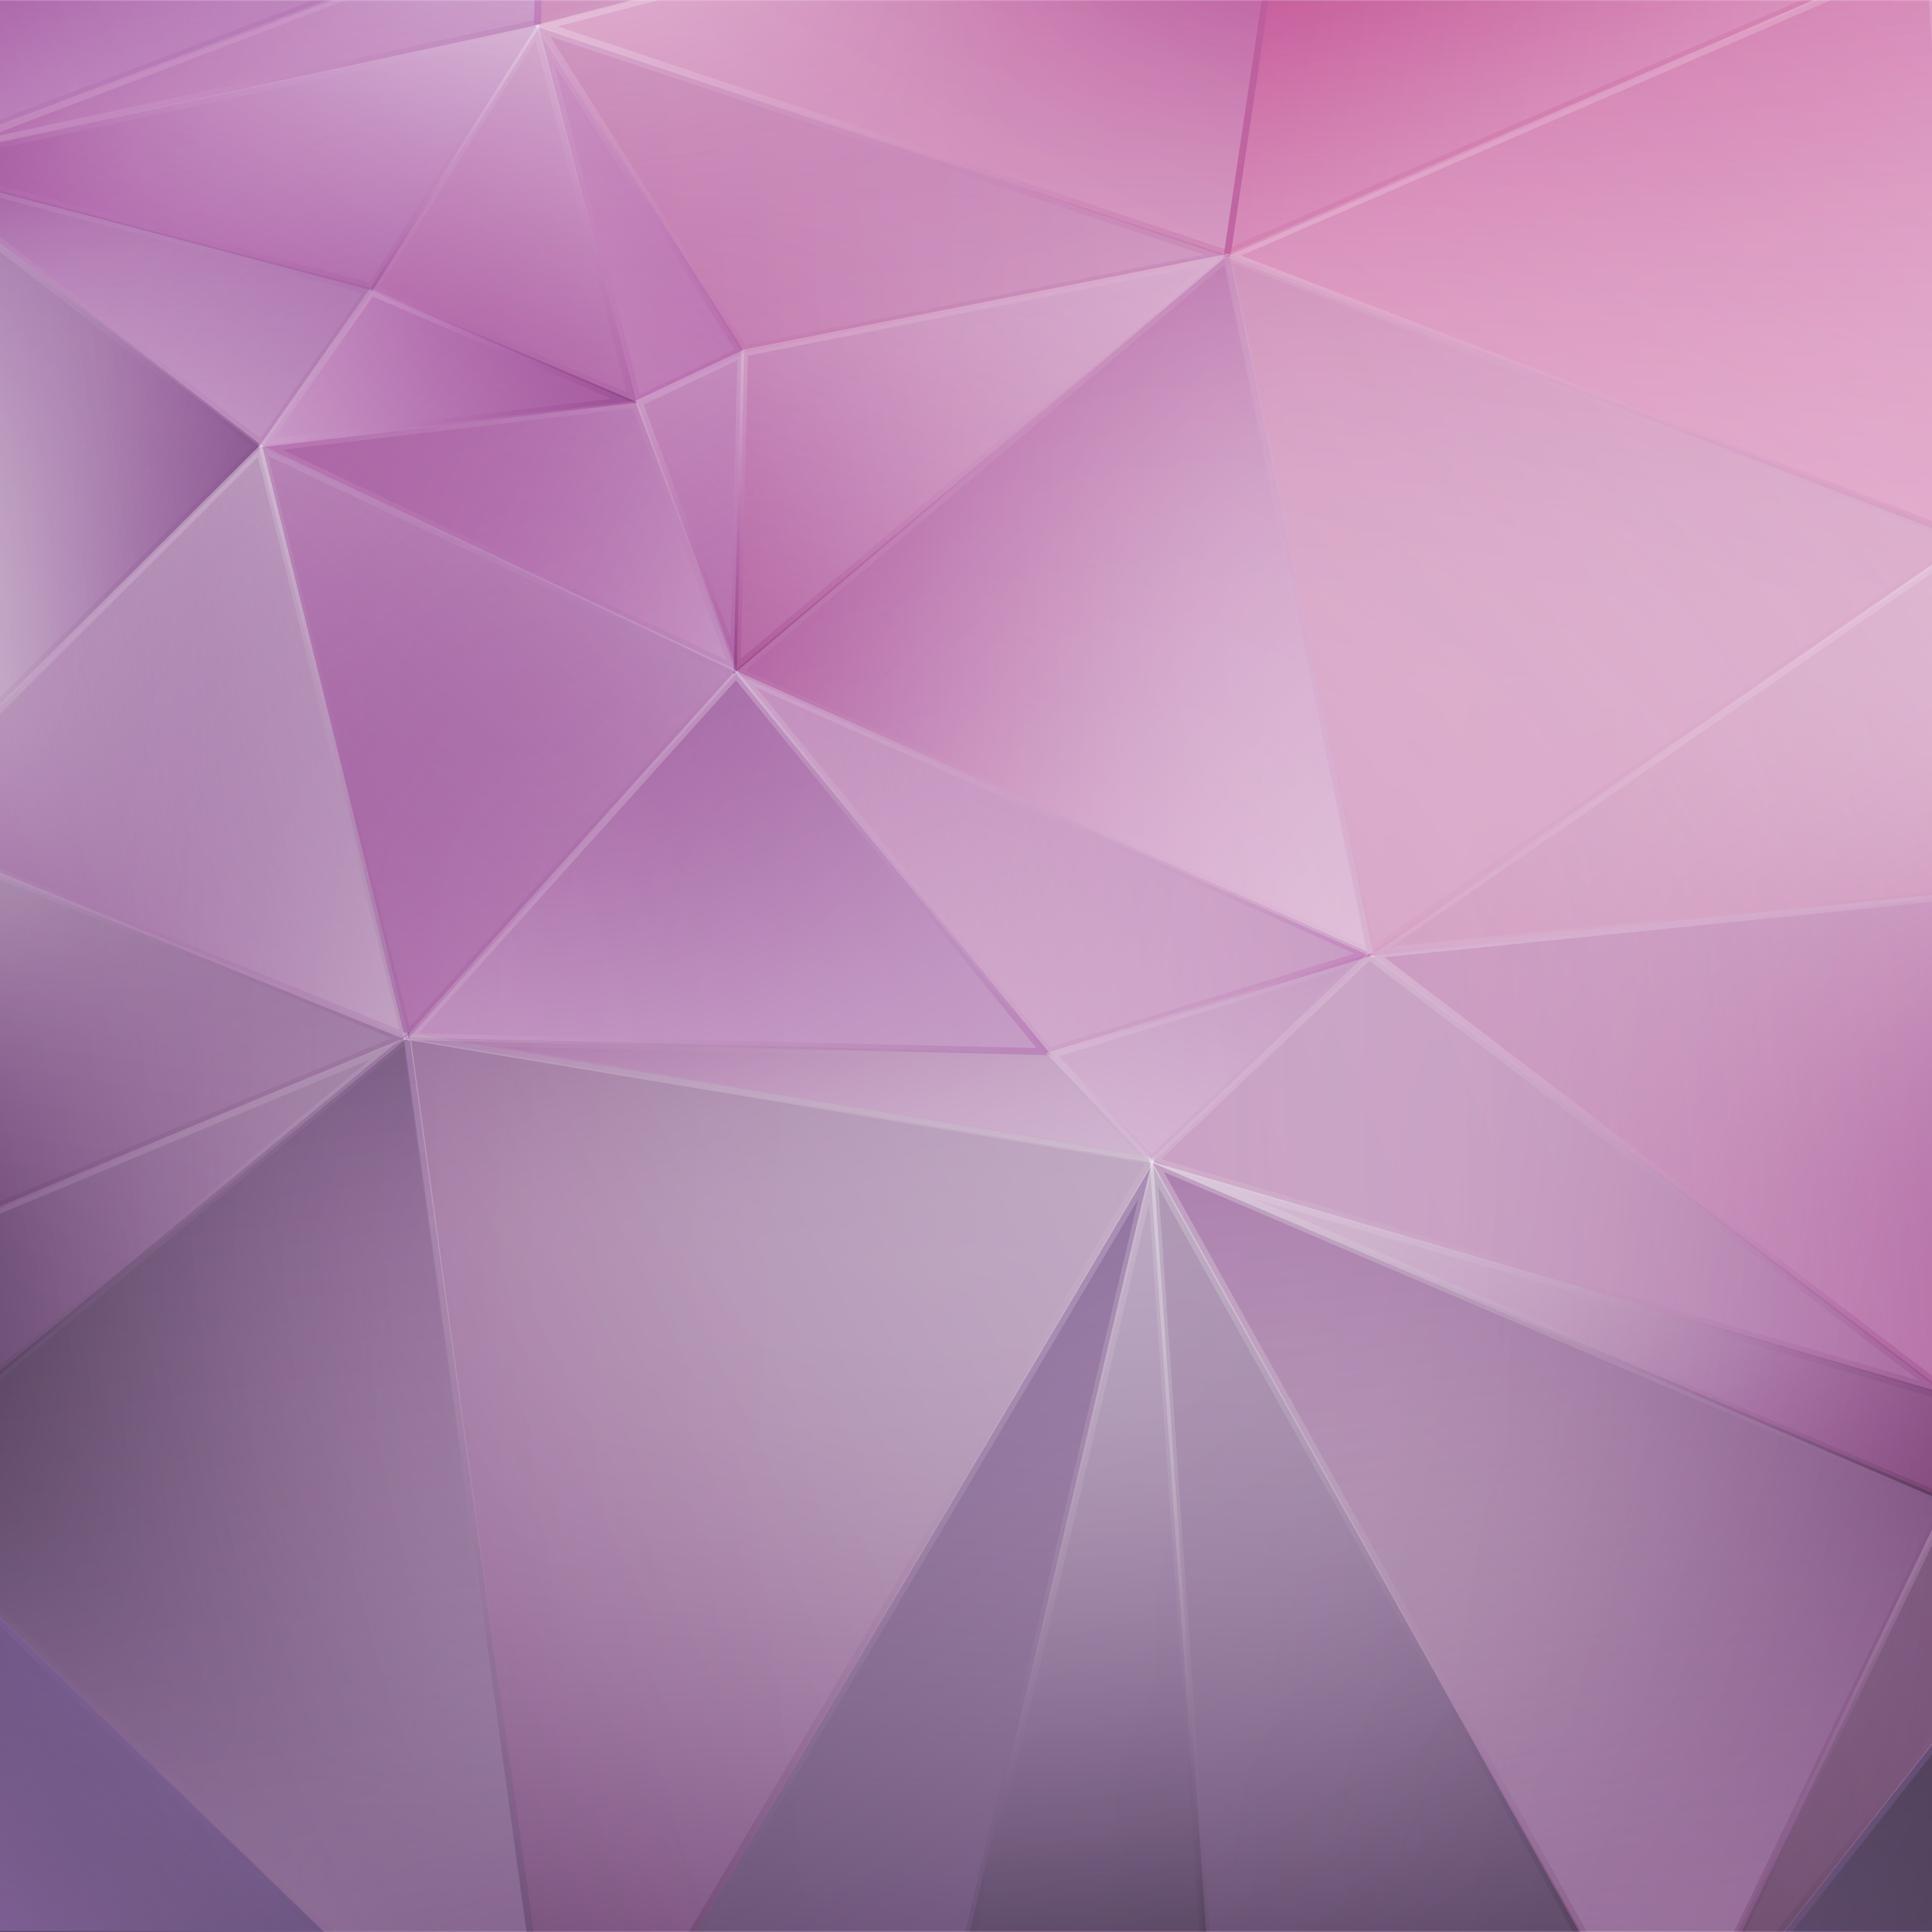 Pink crystal geometric background Download Free Vectors, Clipart Graphics & Vector Art